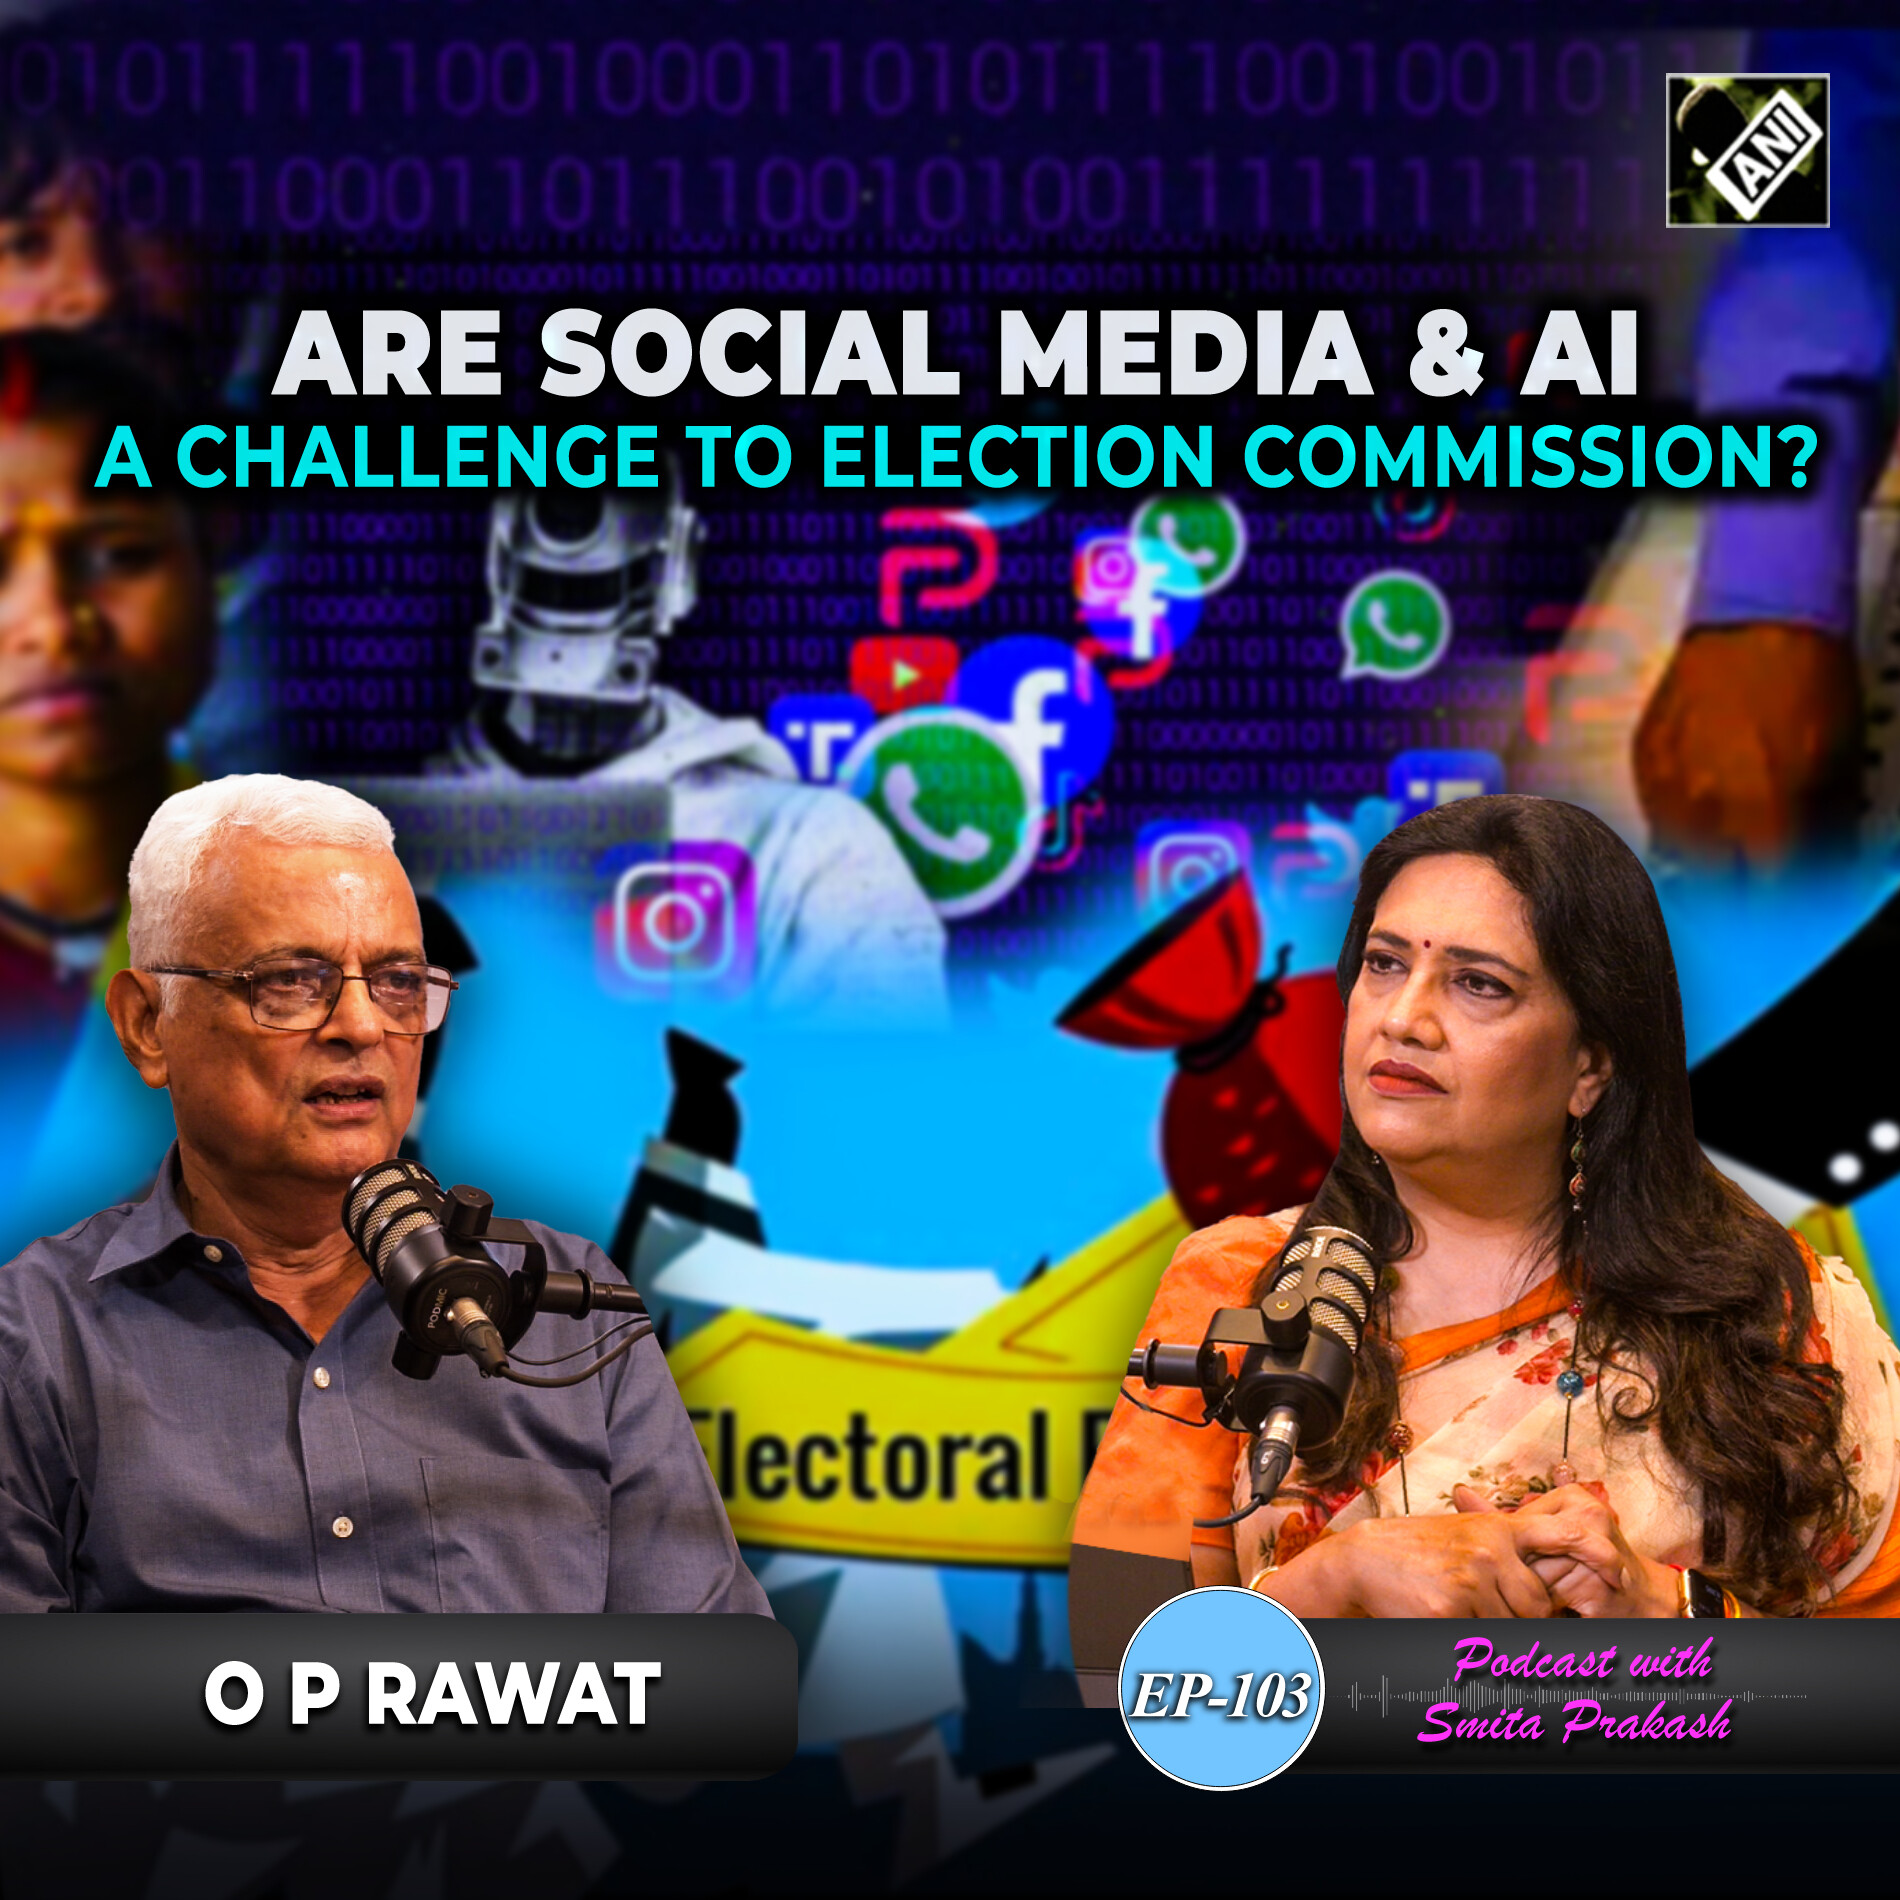 Episode 103 - EVM vs Ballot, Poll Violence, challenges from AI, Social media in Elections with OP Rawat